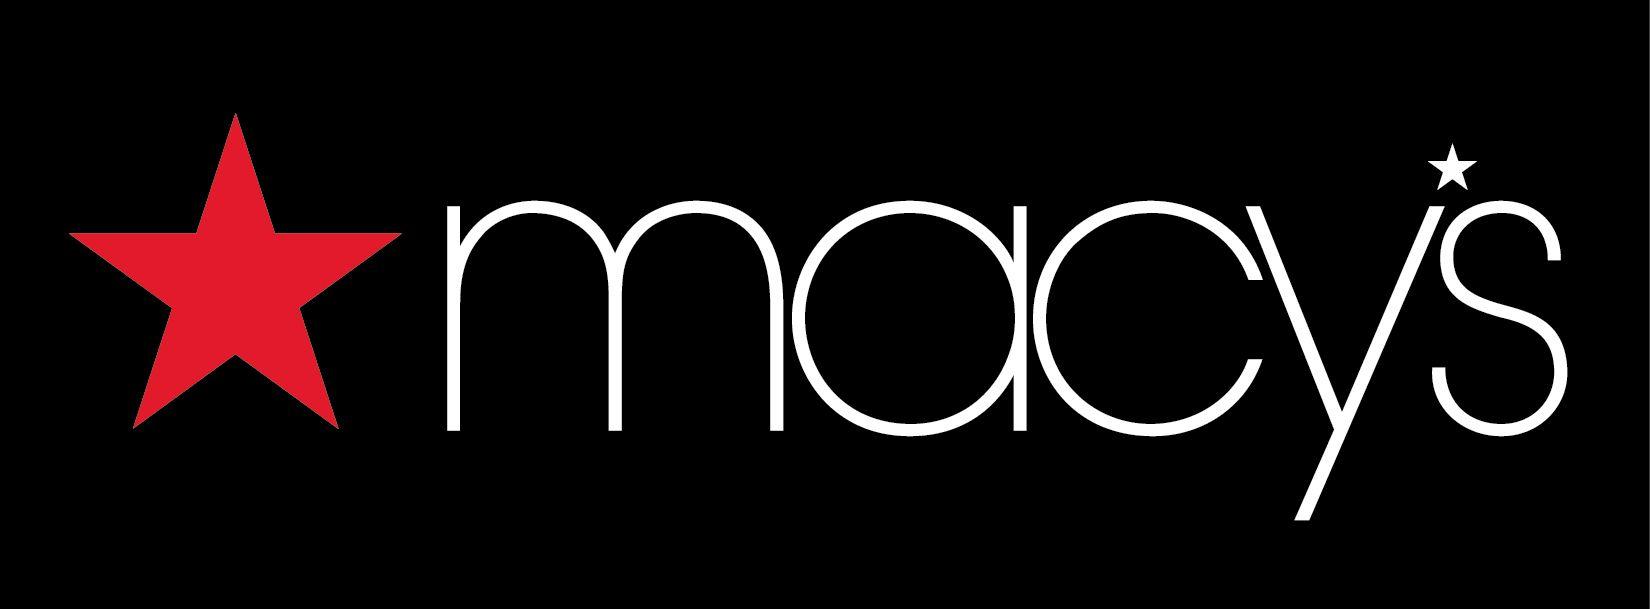 Macy's Star Logo - Macy's famous red star logo was inspired by founder R.H. Macy's ...